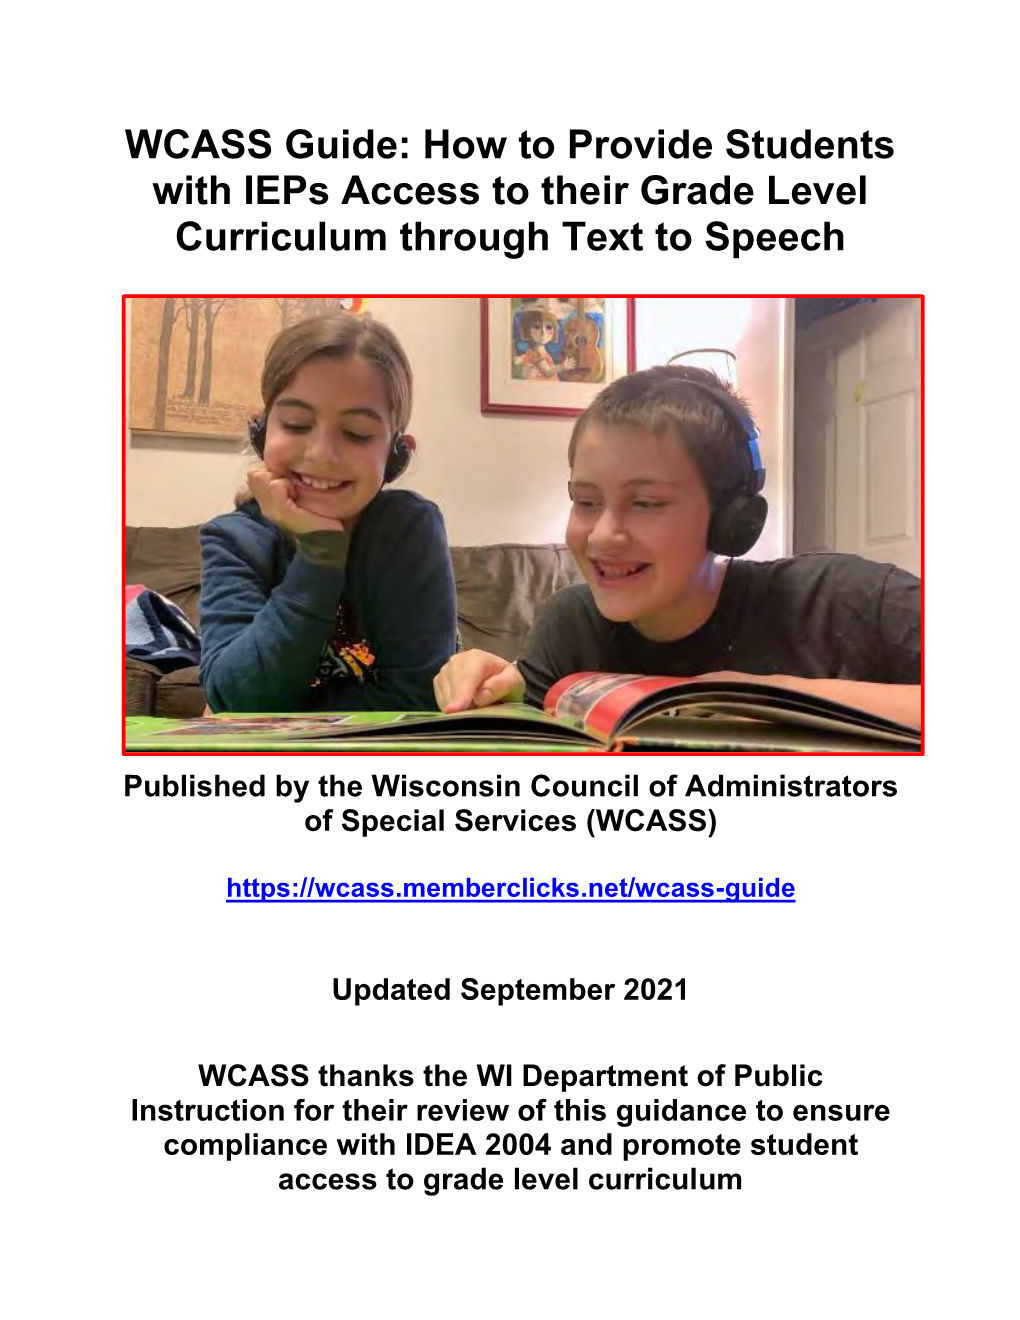 WCASS Guide: How to Provide Students with Ieps Access to Their Grade Level Curriculum Through Text to Speech